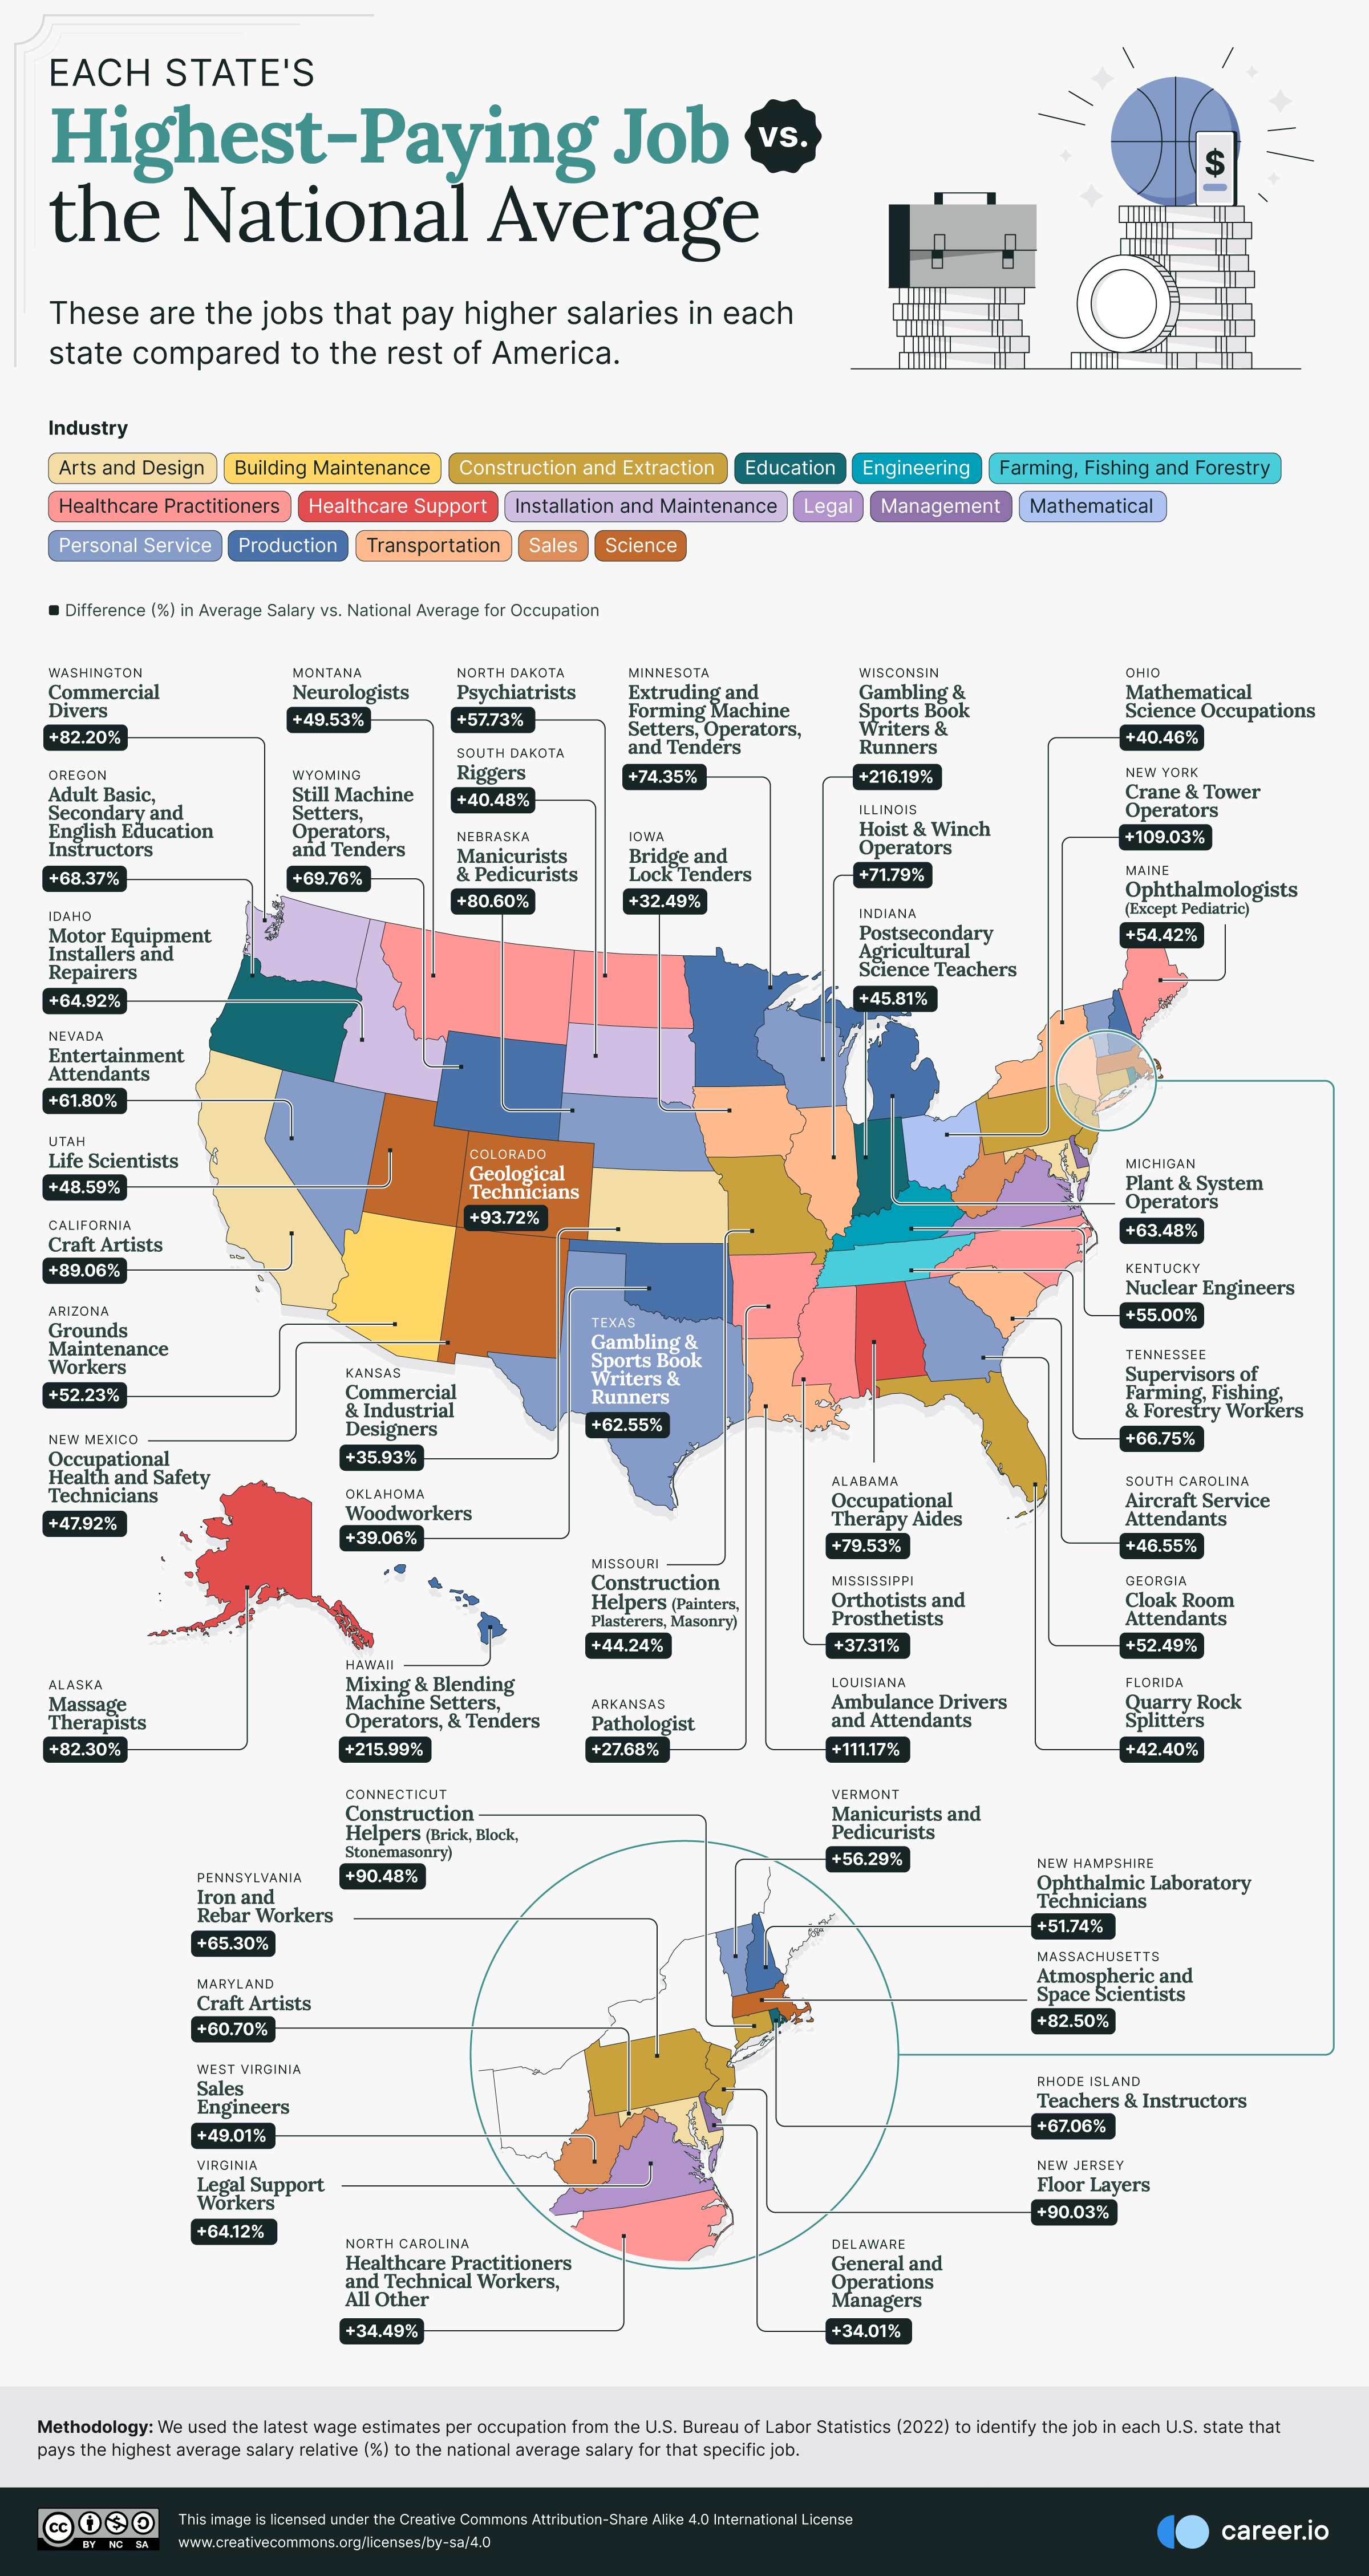 01 Each-States-Highest-Paying-Job-vs-the-National-Average